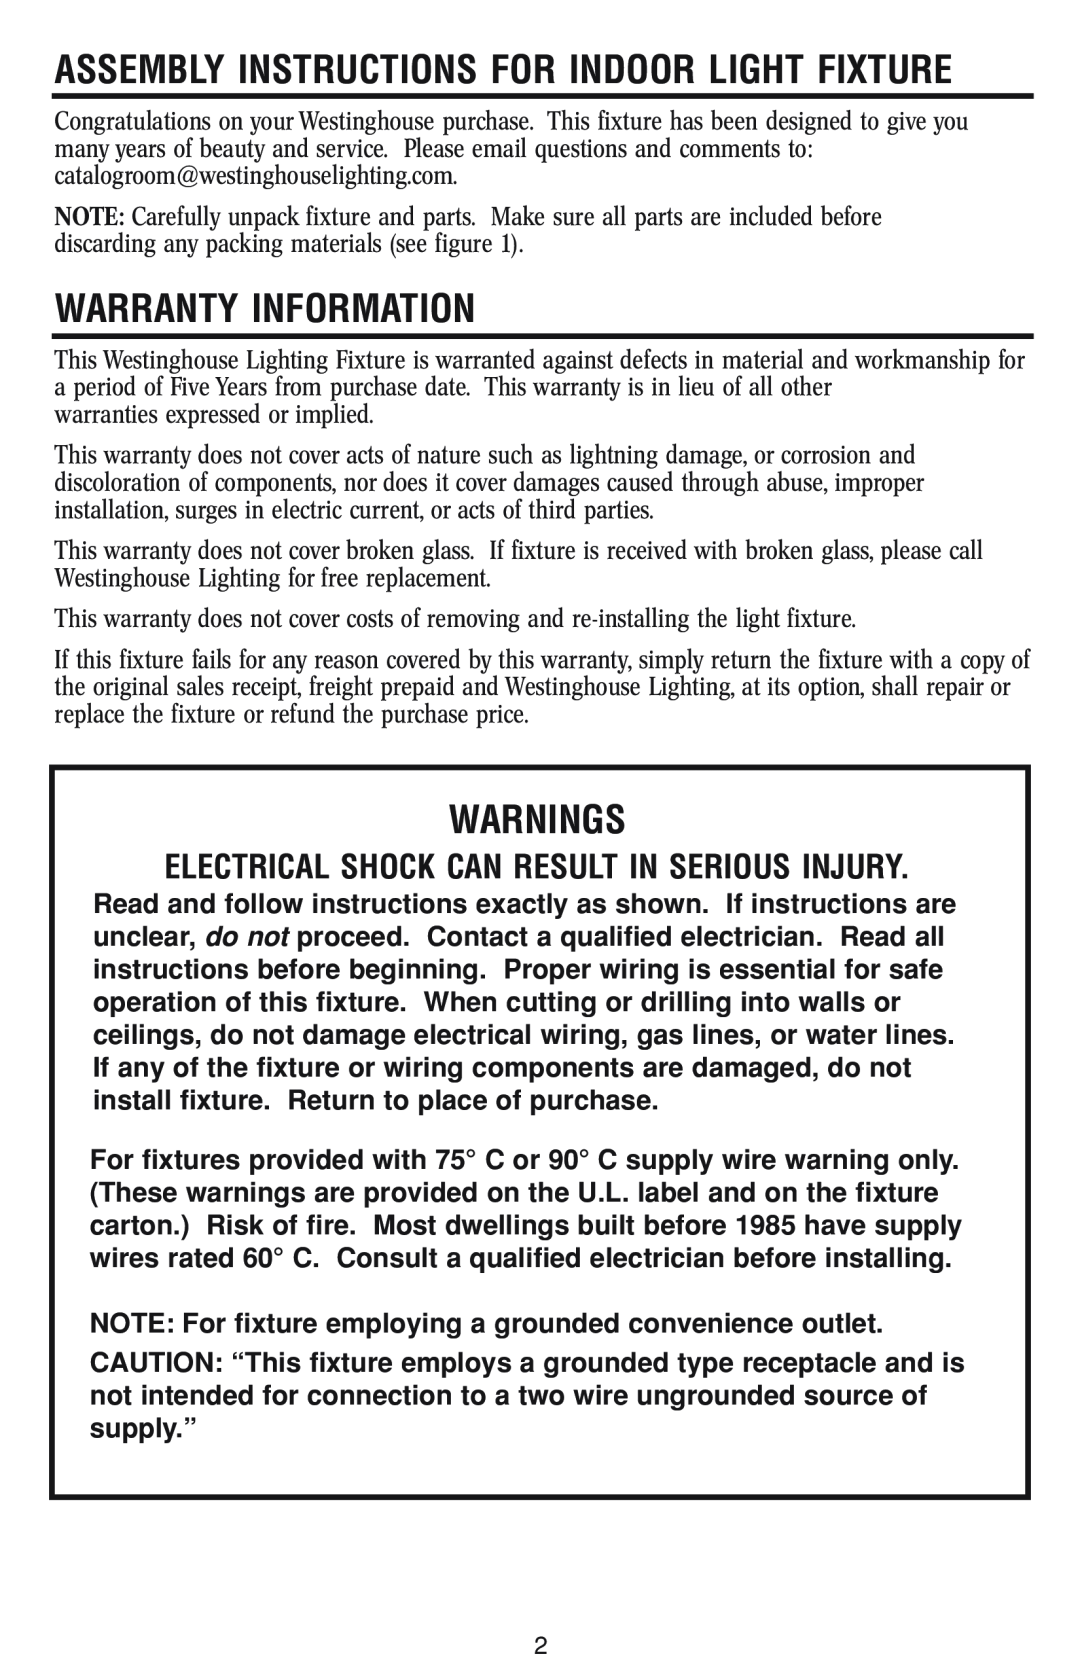 Westinghouse w-023 owner manual Warranty Information, Warnings, Assembly Instructions For Indoor Light Fixture 